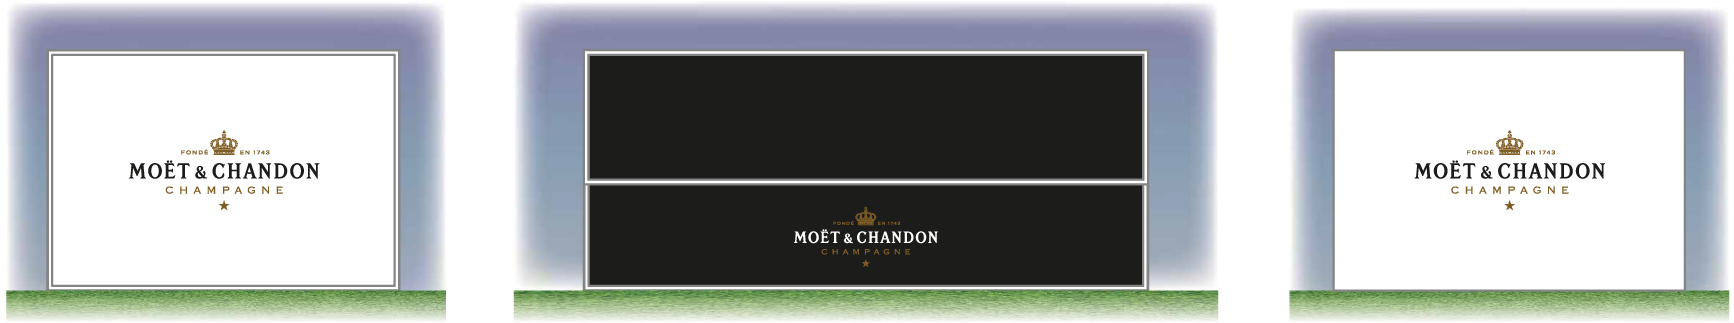 mote and chandon design and graphics